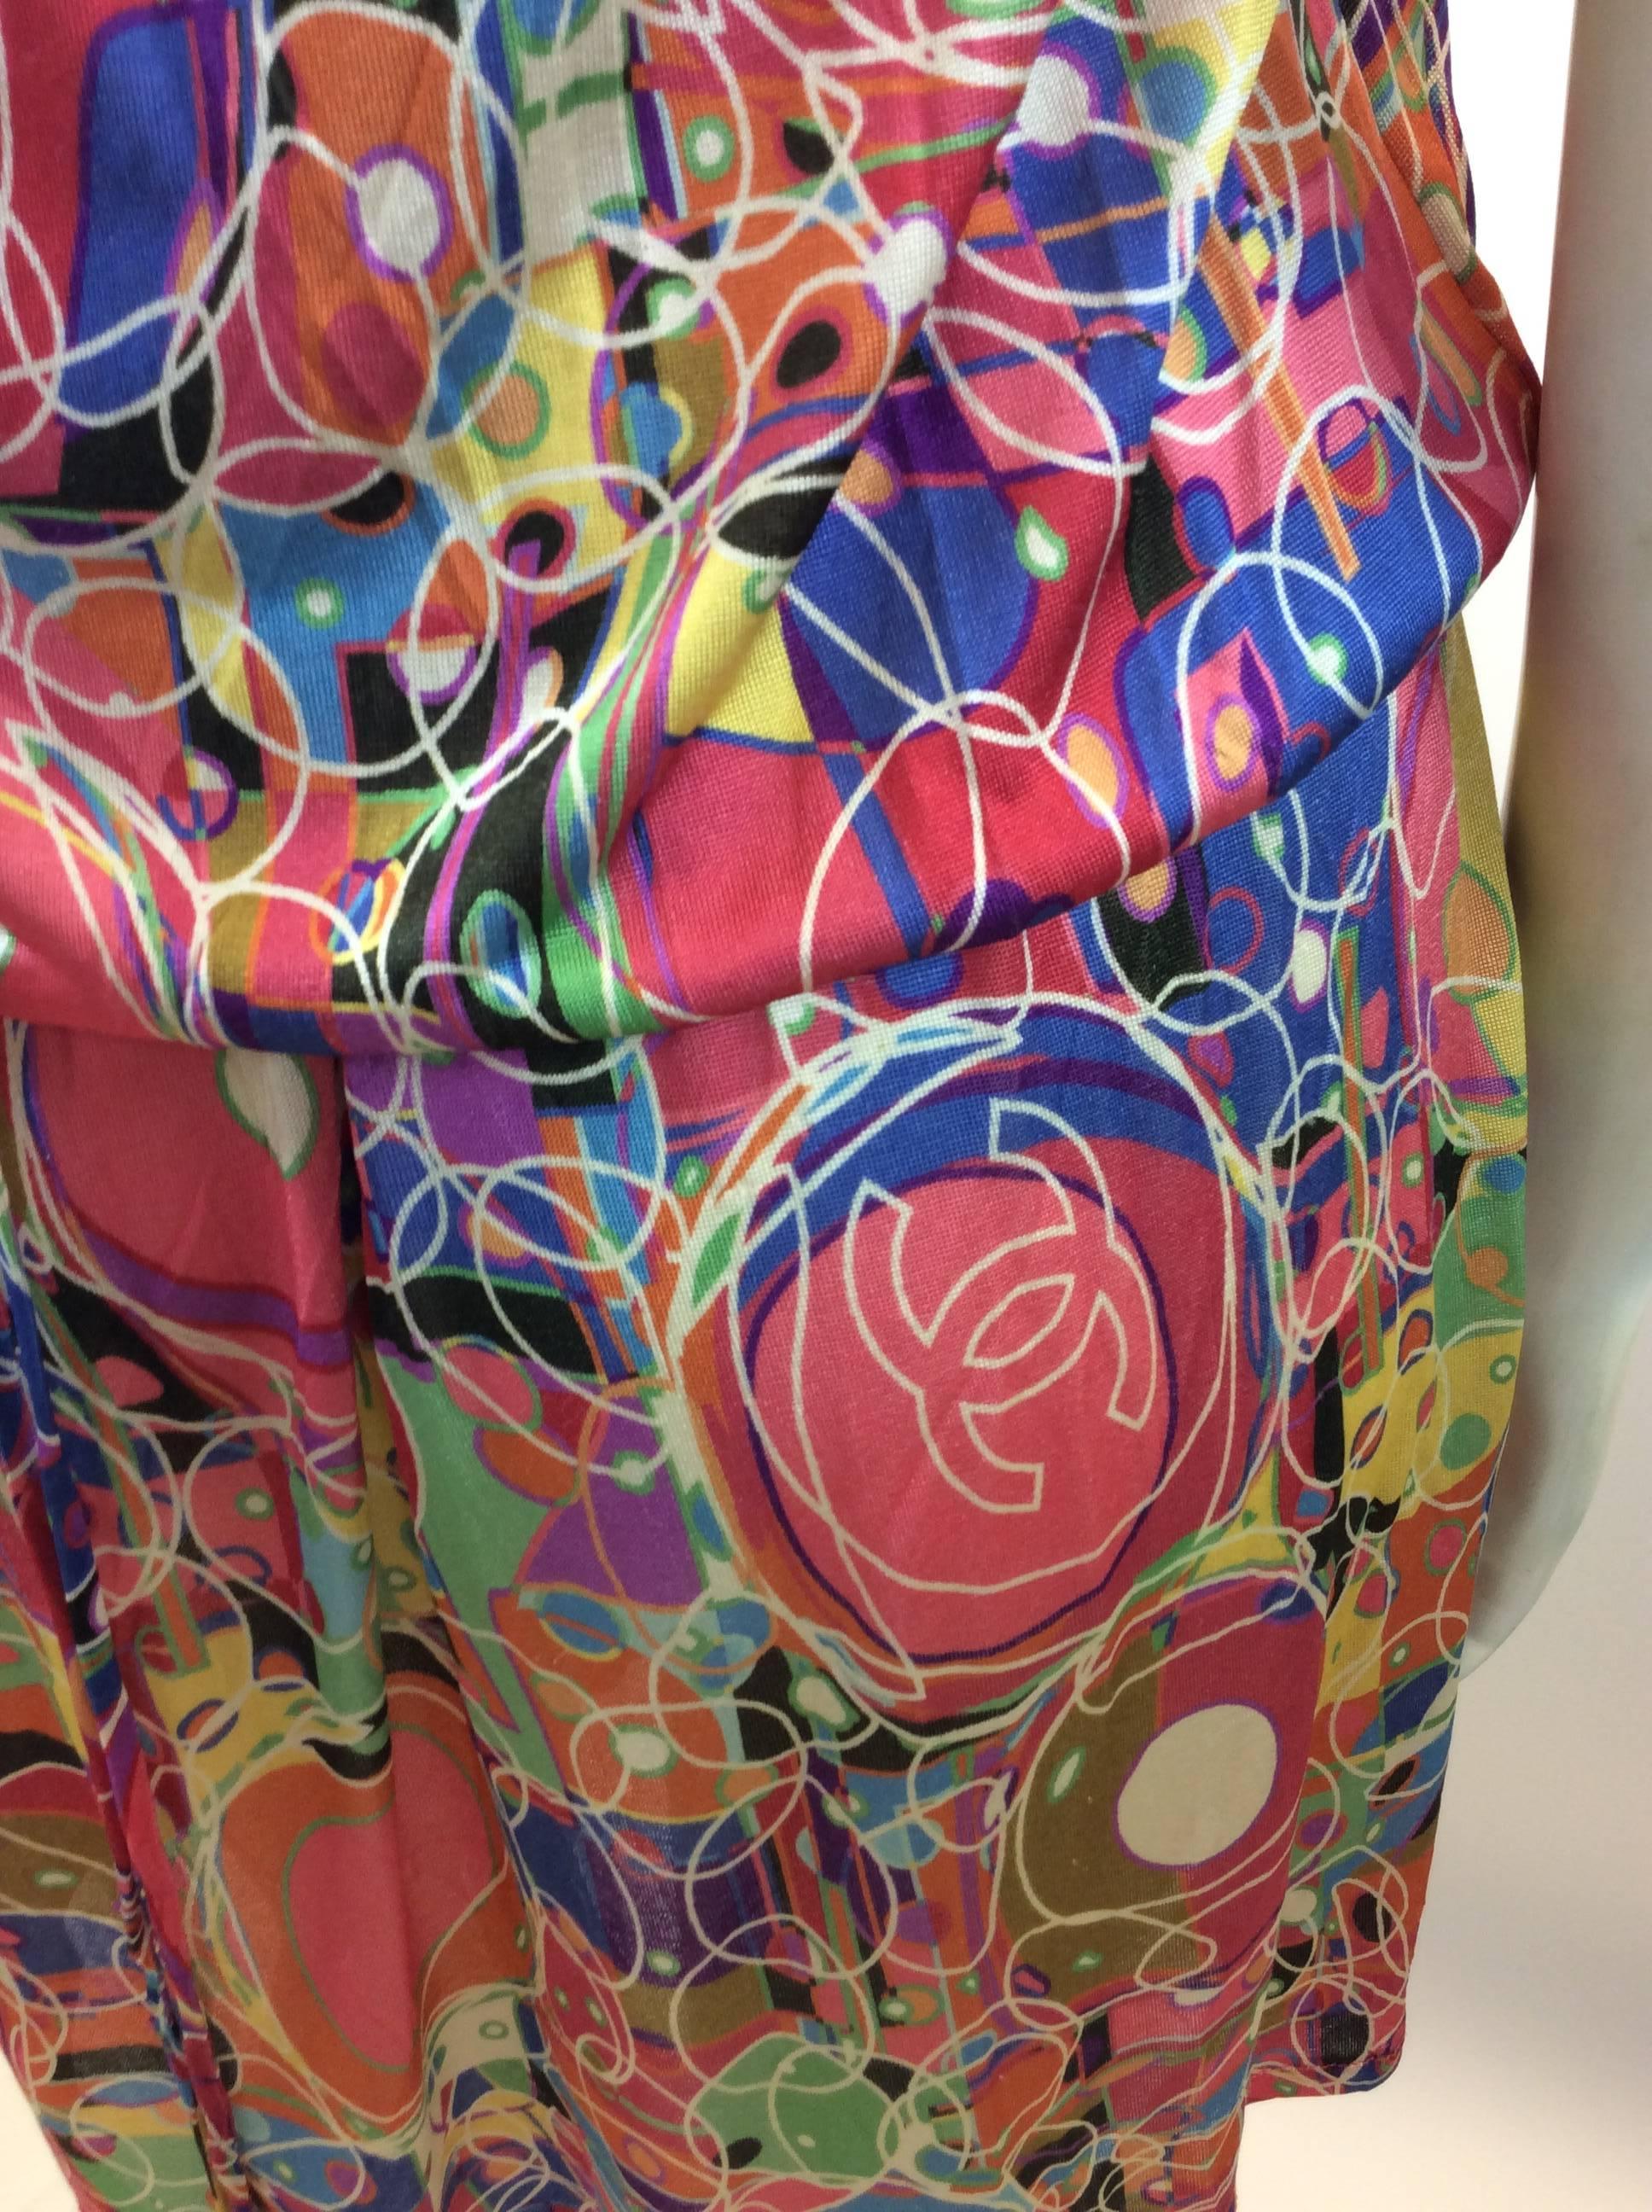 Chanel Print Silk Strapless Dress In Excellent Condition For Sale In Narberth, PA